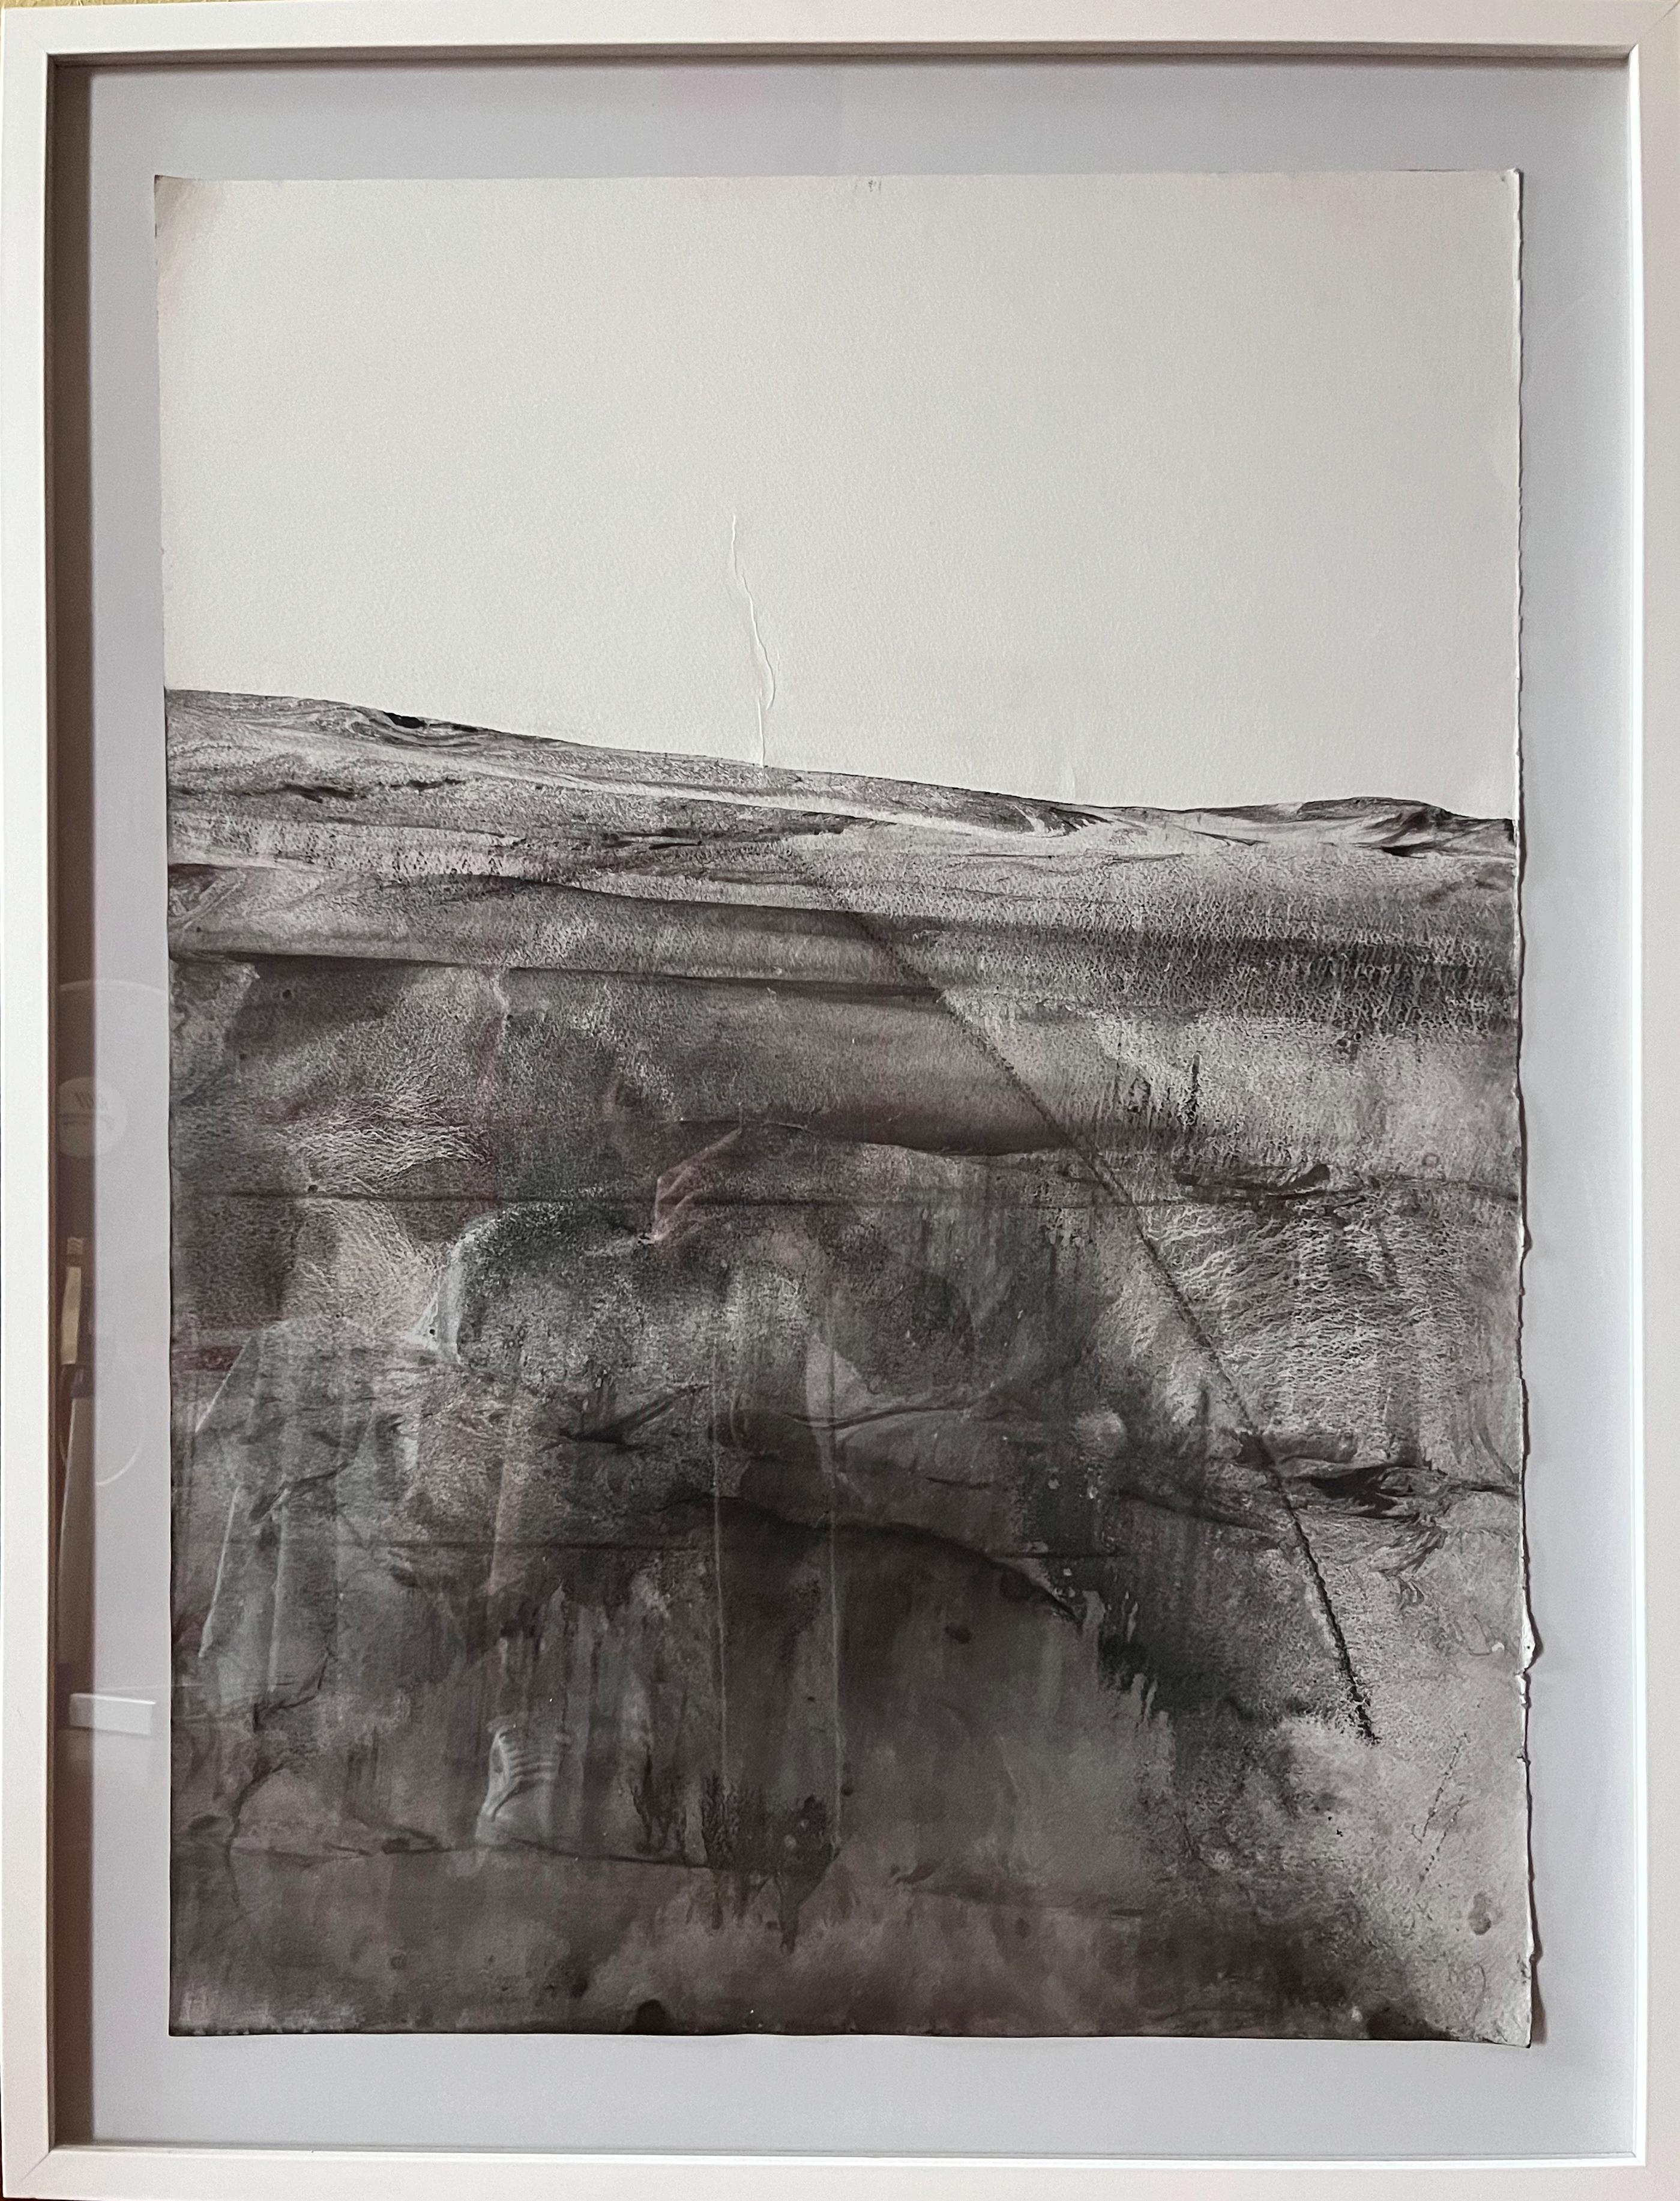 Landscape BW

Mineral Oxide on Paper
55x74 cm
framed 68x88 cm
Original Art 
Ready to Hang


The use of natural materials such as mineral oxide powder connects the work to a dimension of respect for the environment and connection with nature. The